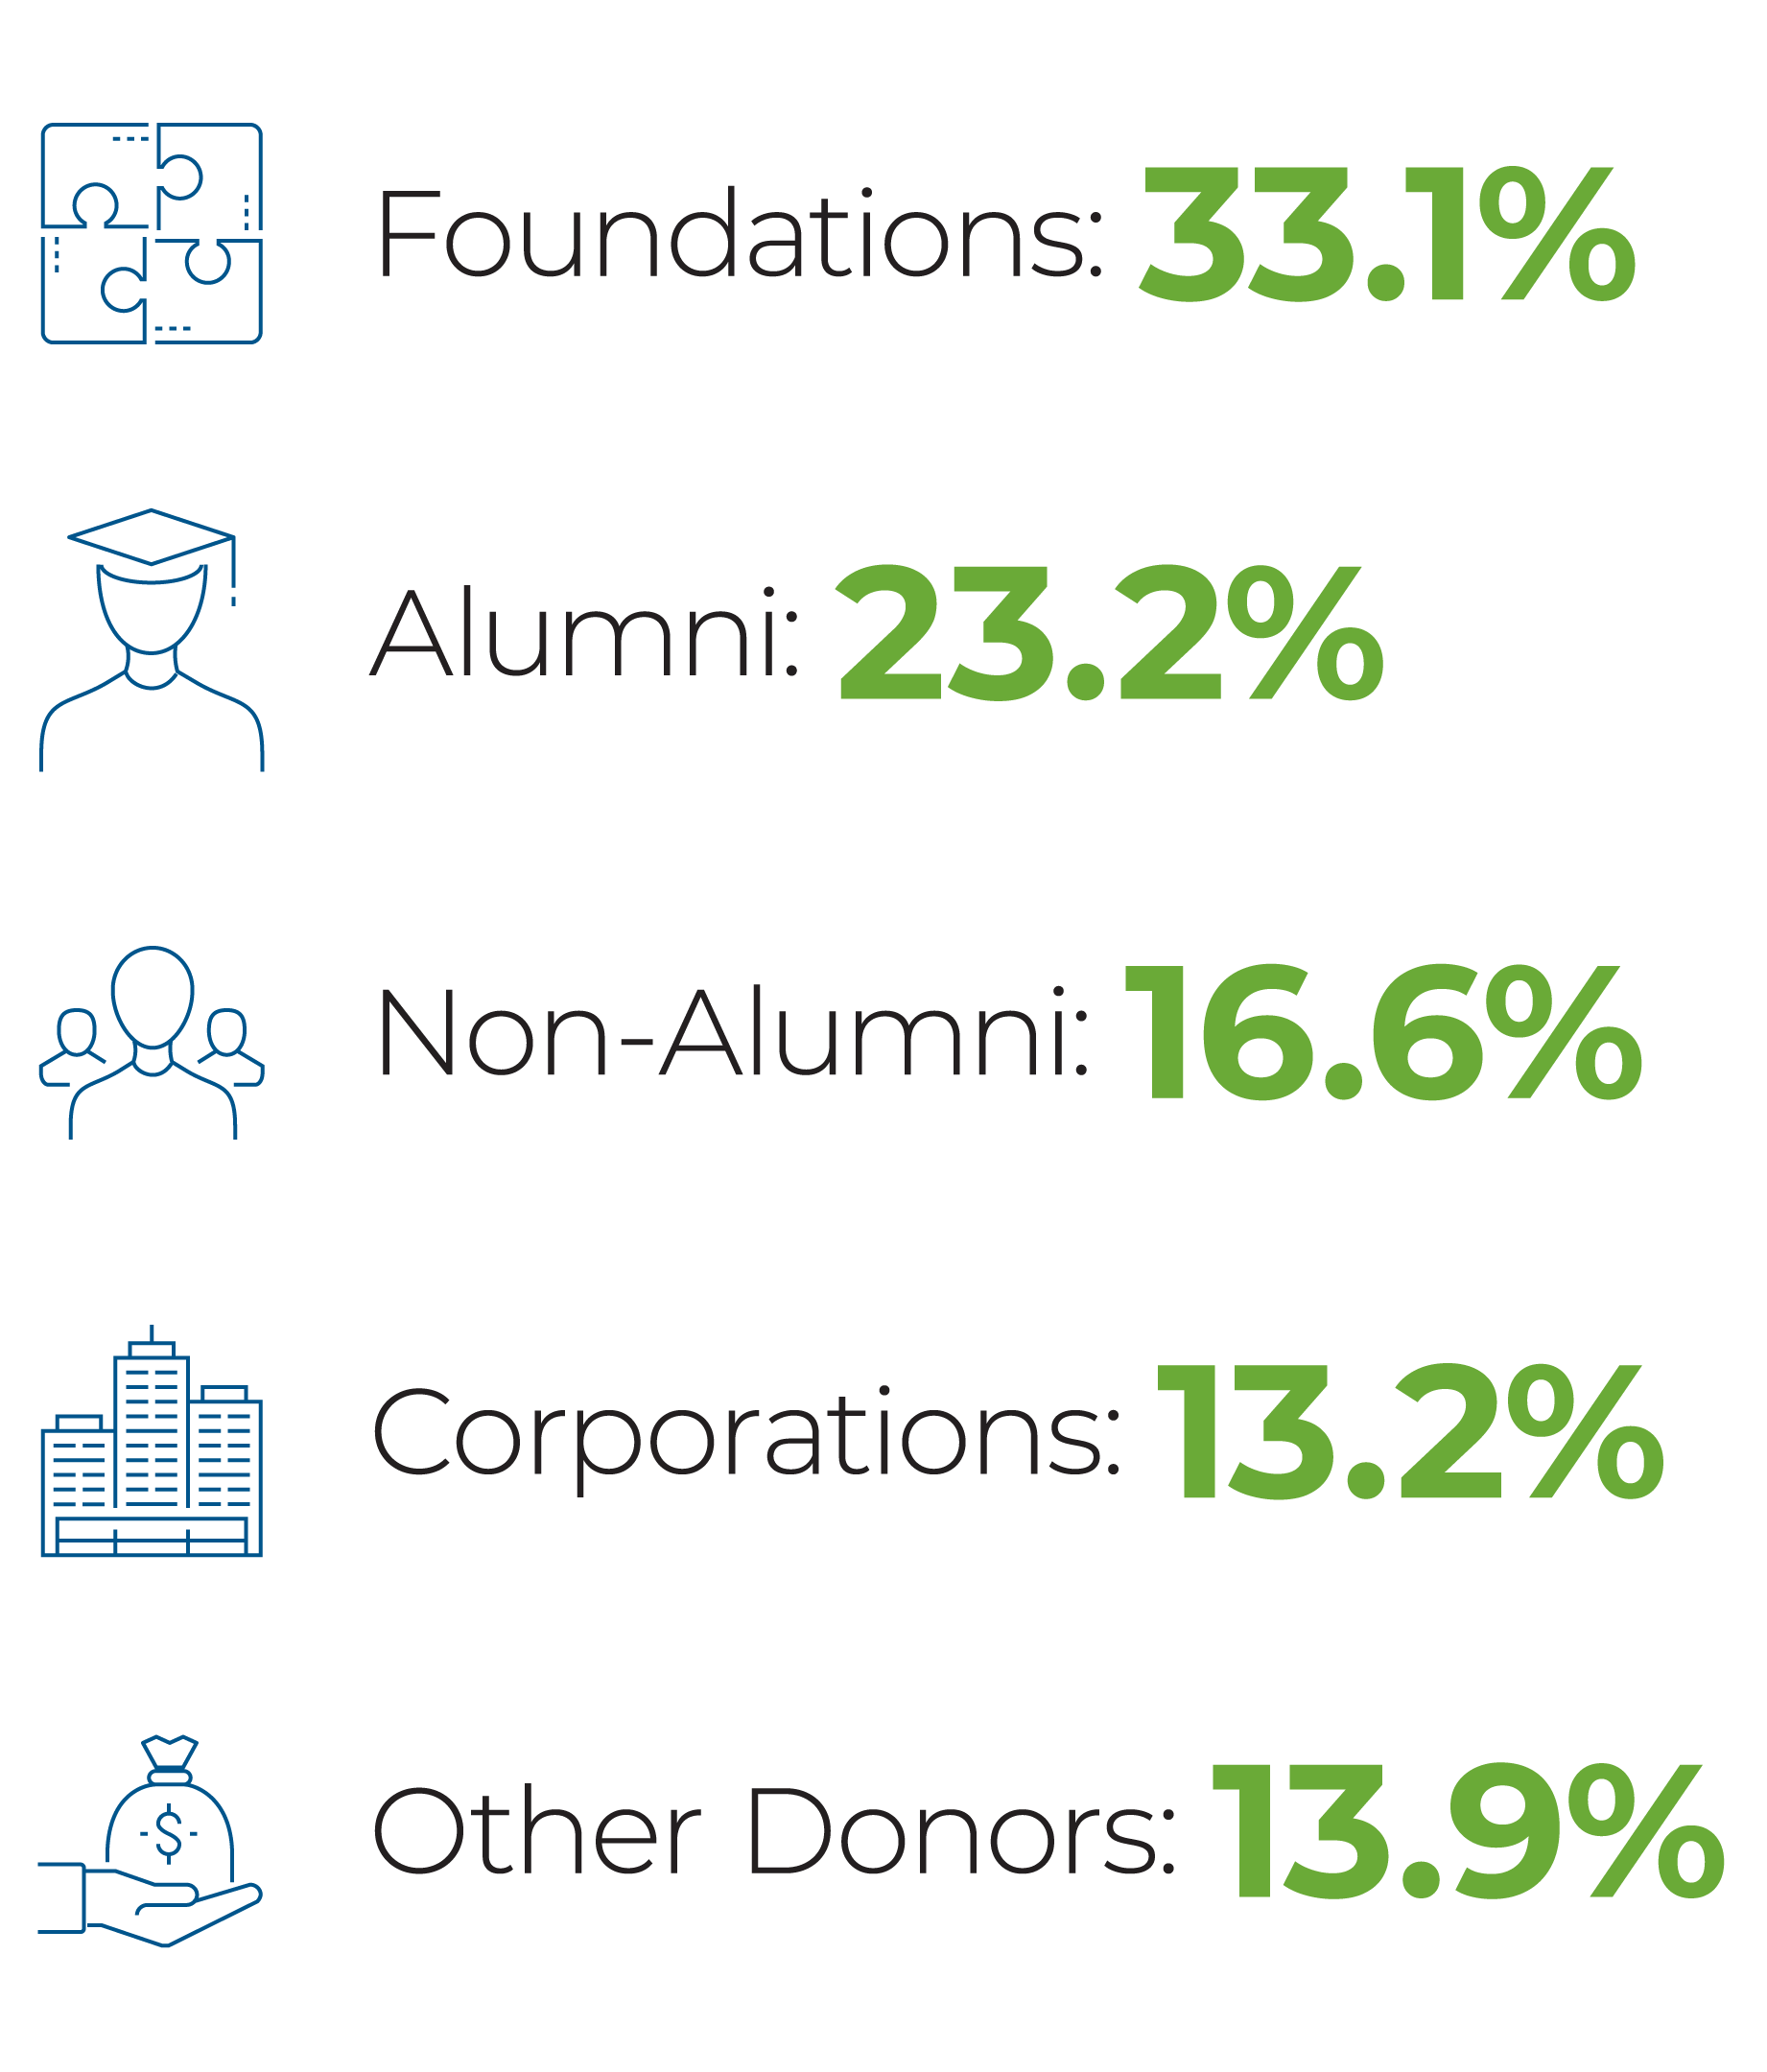 The graphic illustrates leading college and university donor percentages by category: Foundations 33.1%, Alumni 23%, Non-Alumni 16.6%, Corporations 13.2%, and Other Donors 13.9%.